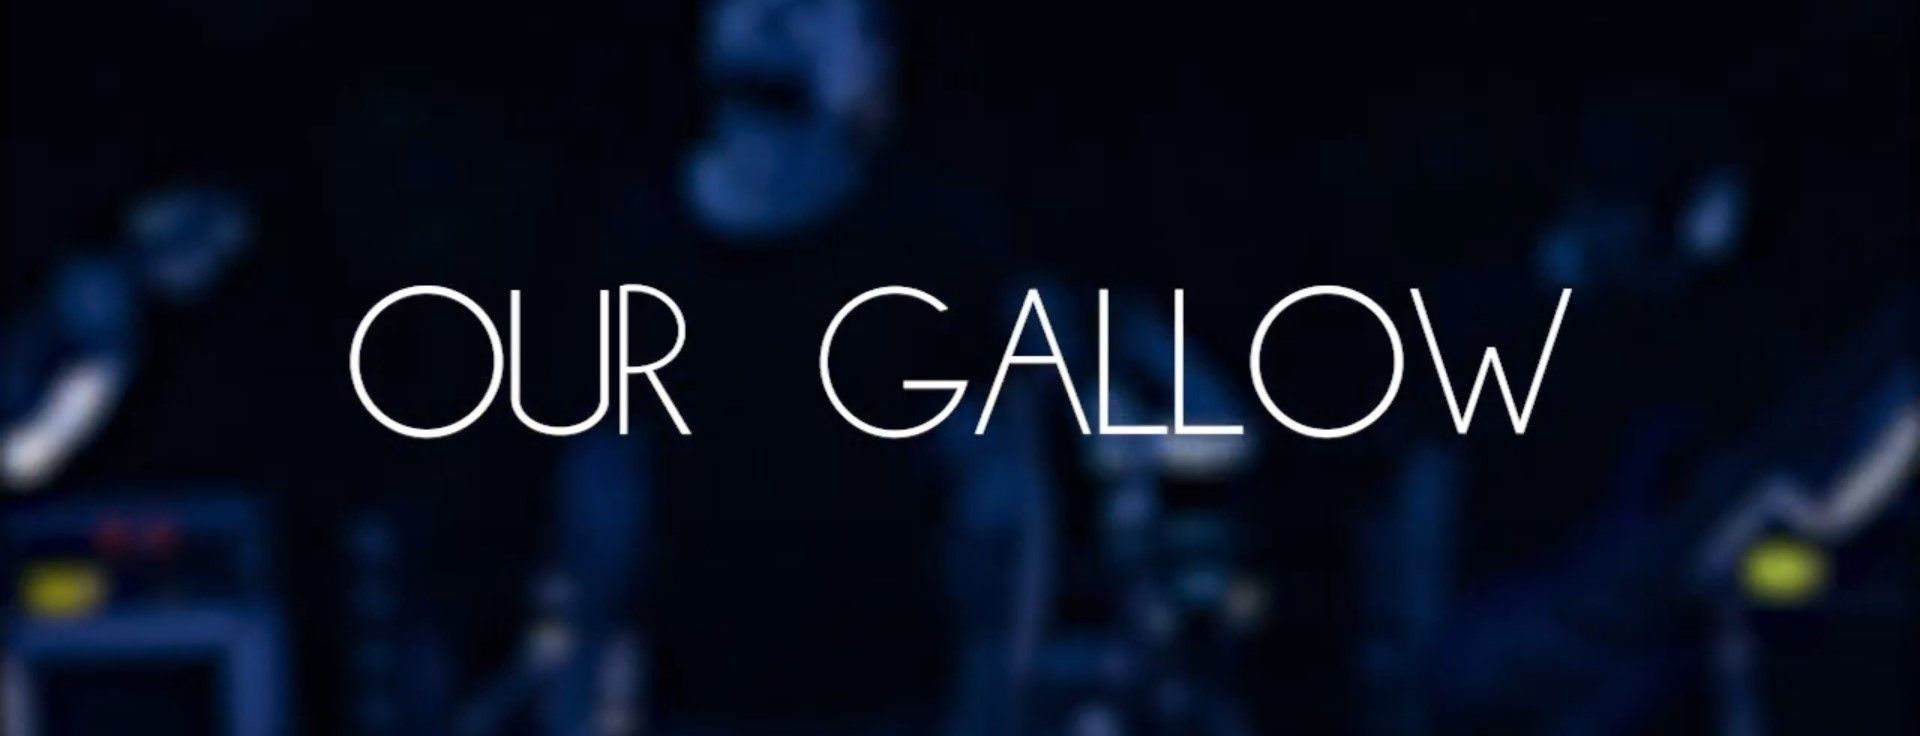 From Particles - Our Gallow (Official)